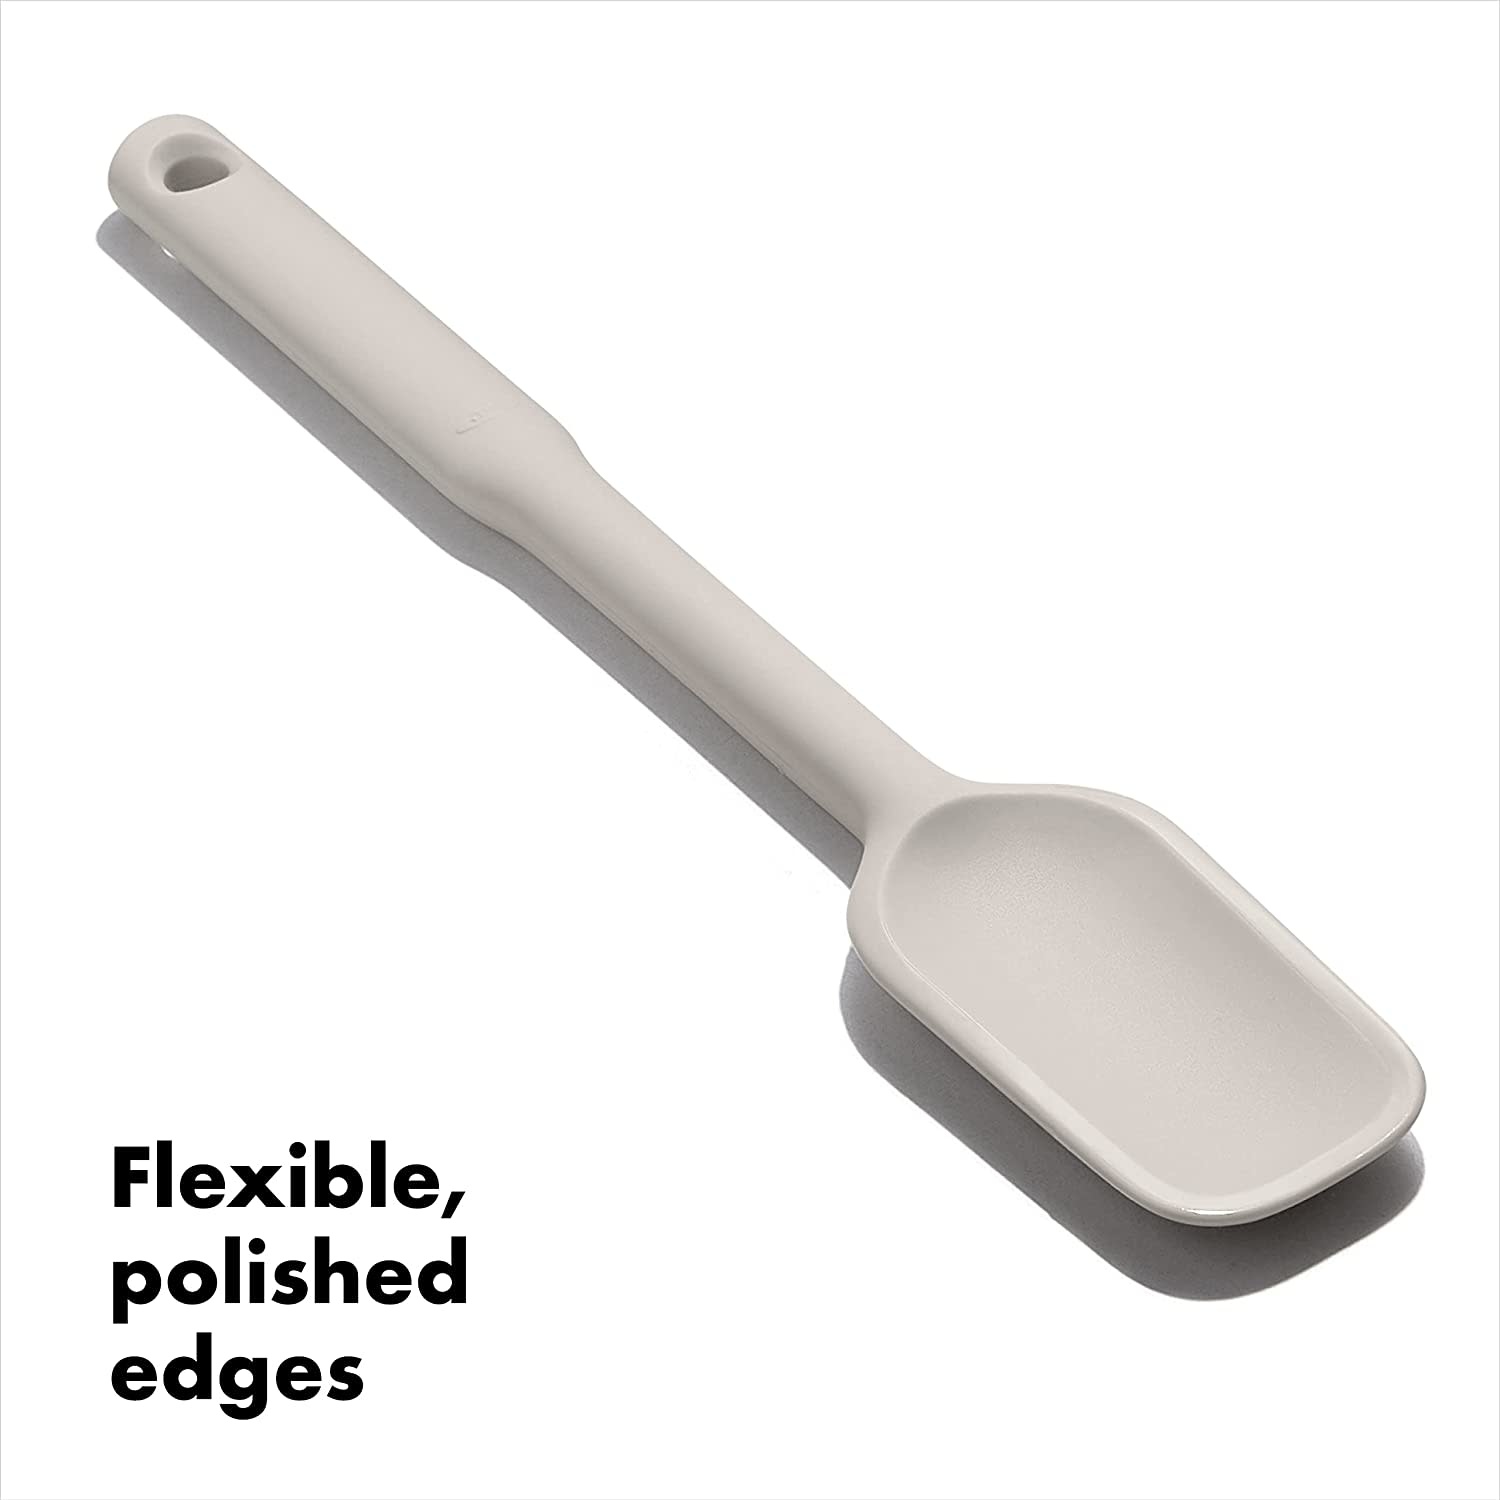 OXO Good Grips Silicone Everyday Spoon Spatula, Oat - Spoons N Spice